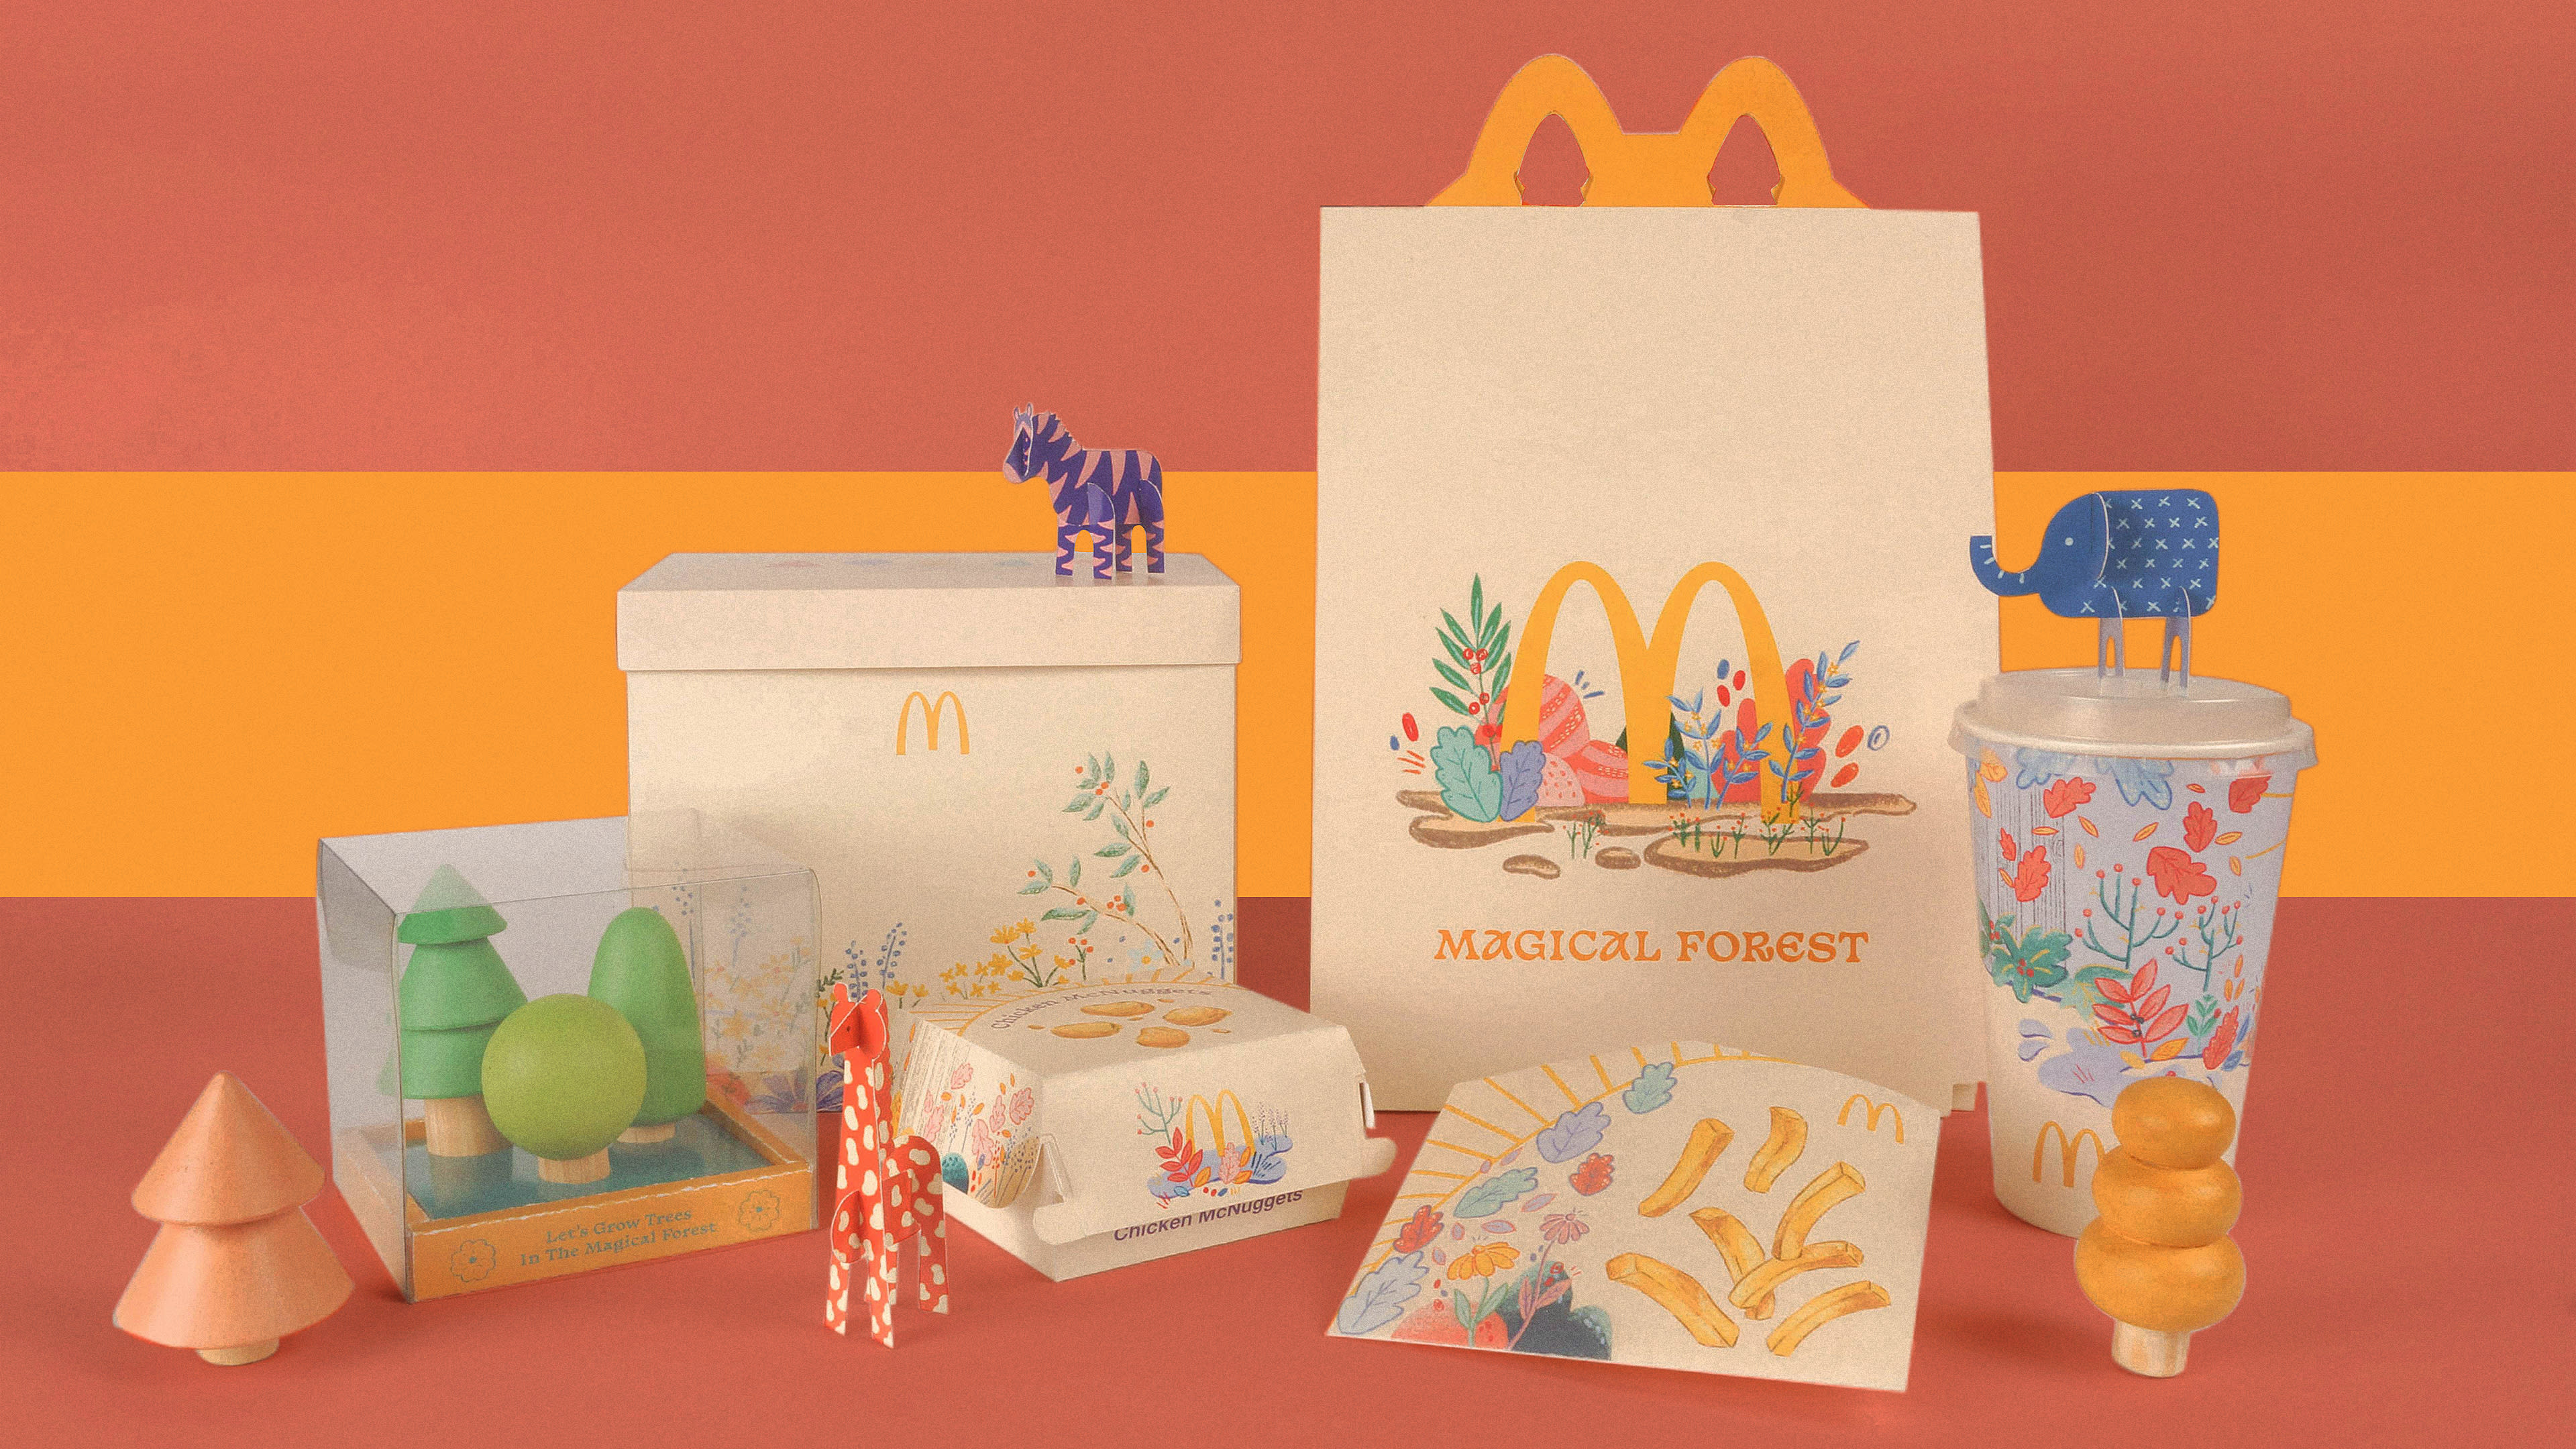 What if McDonald’s ditched all plastic in Happy Meals? This designer created a gorgeous alternative